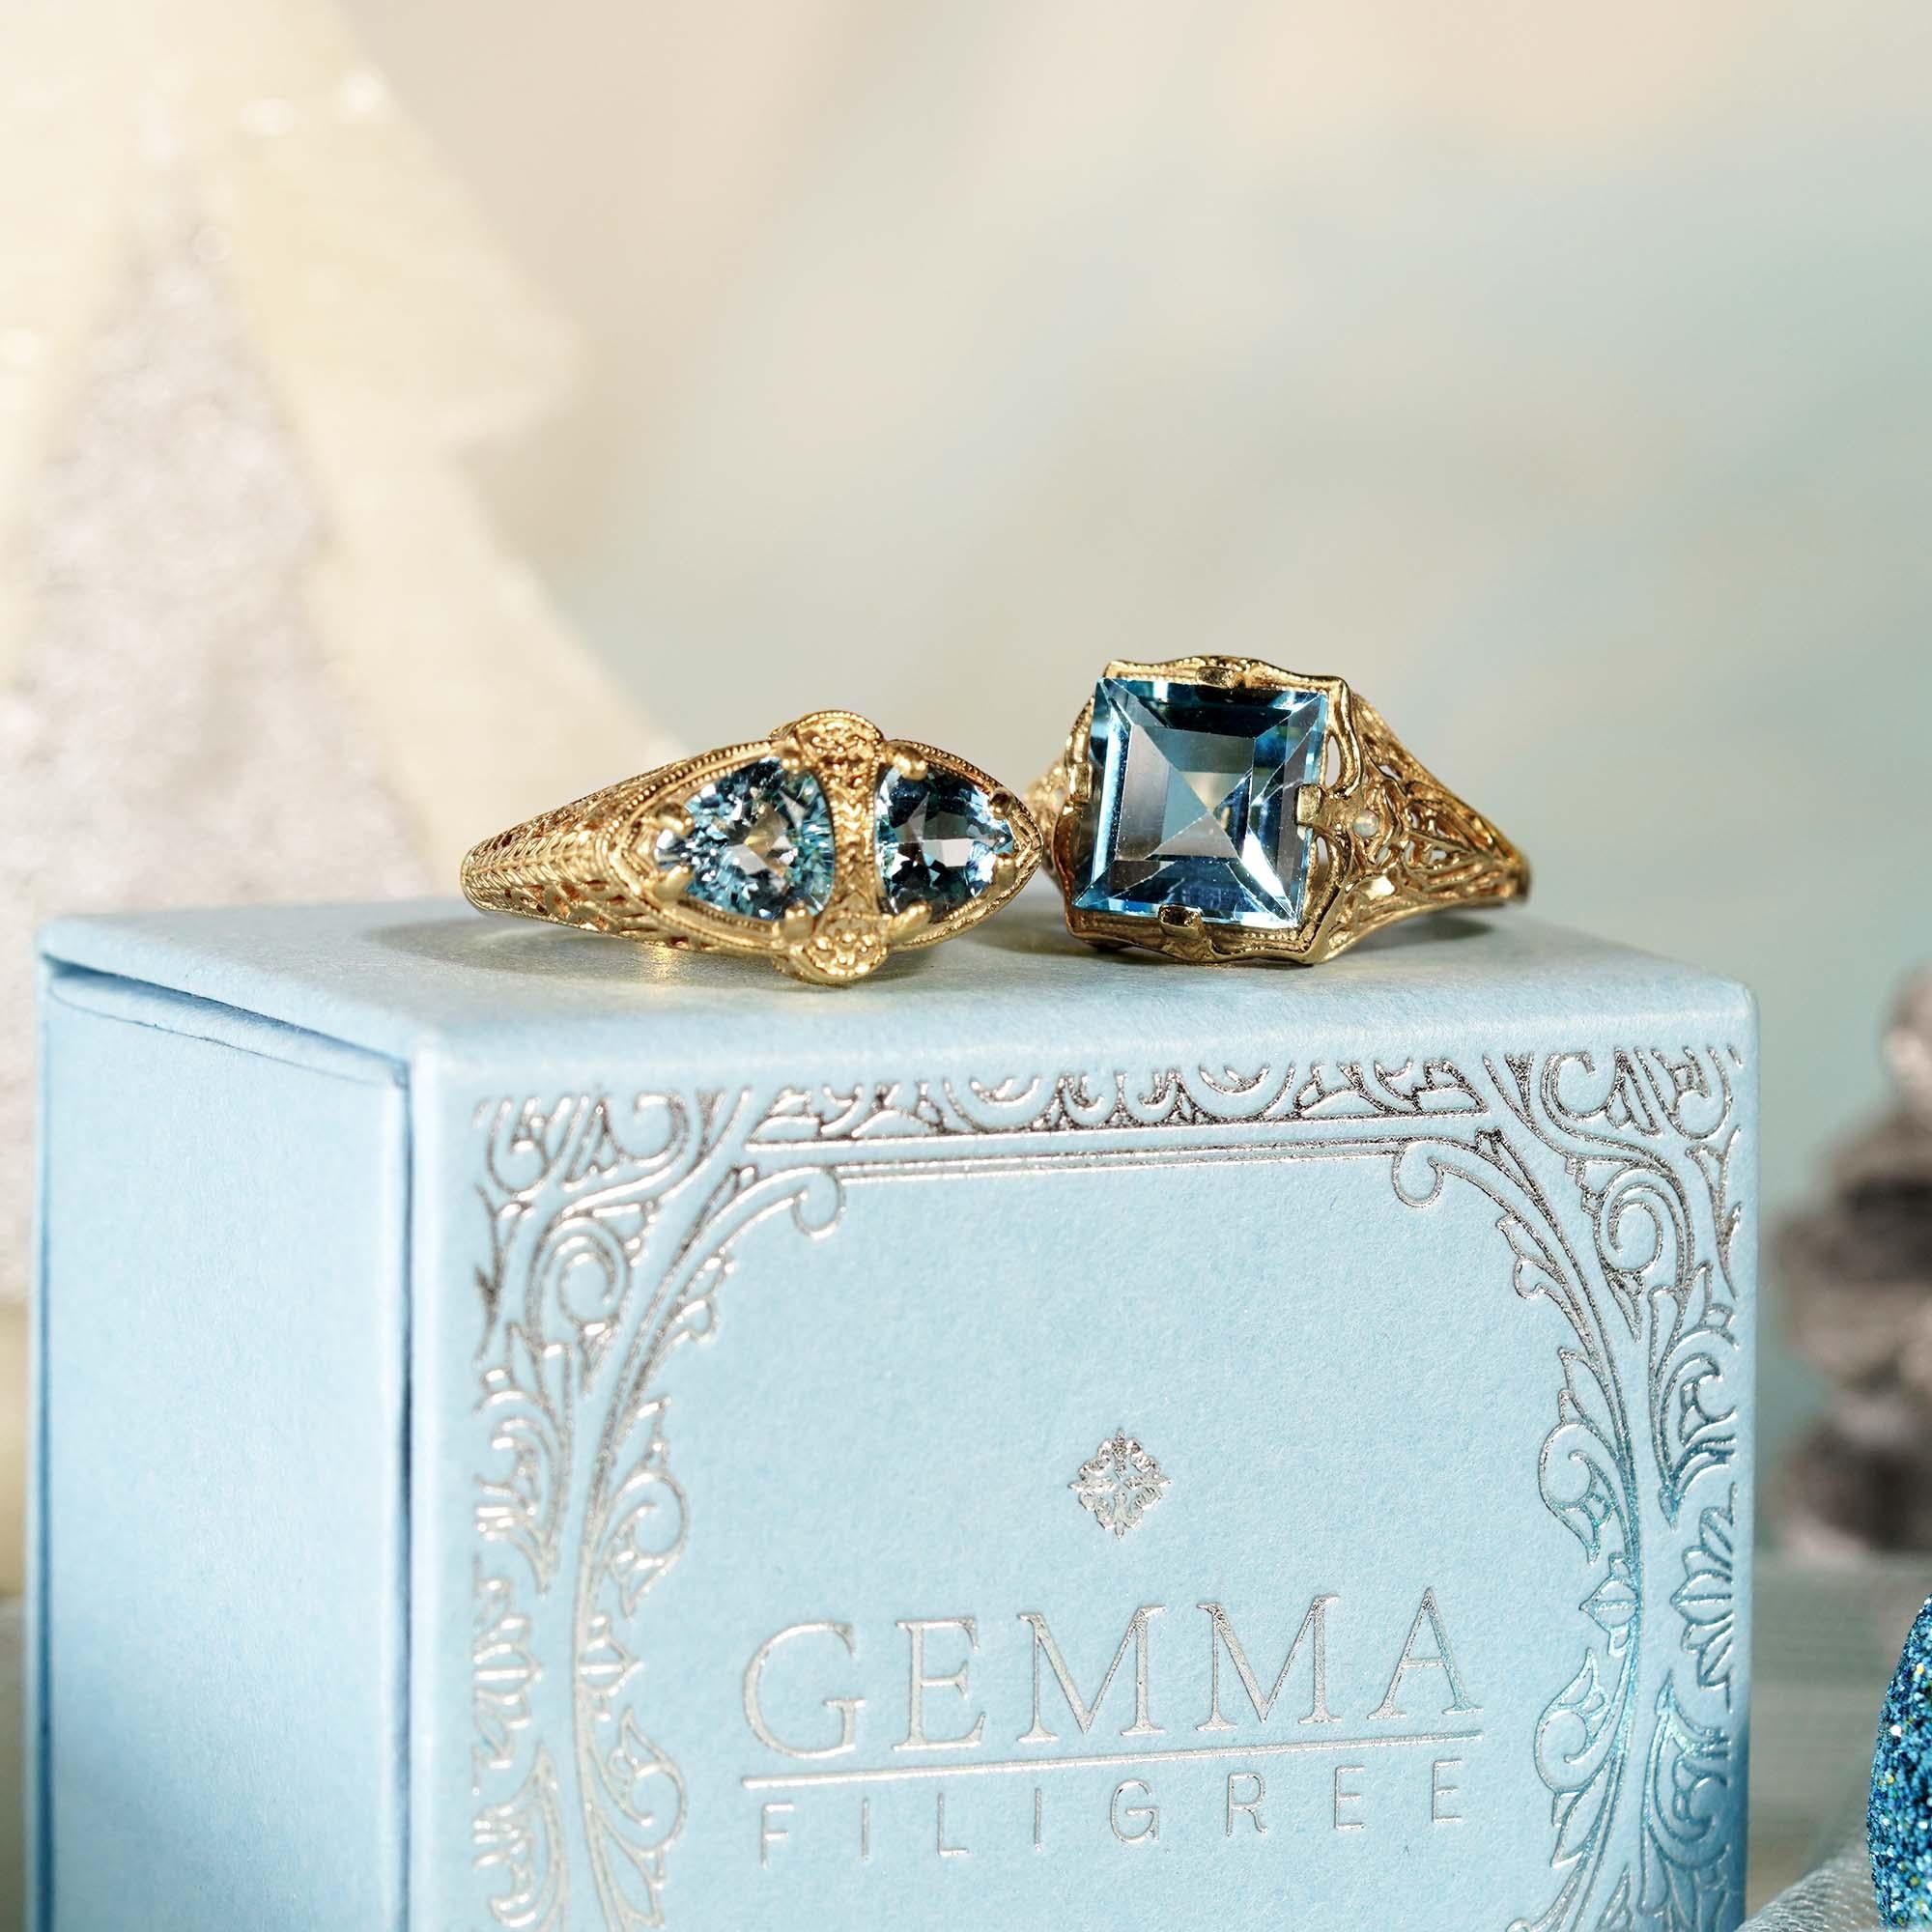 For Sale:  Natural Emerald Cut Blue Topaz Vintage Style Filigree Ring in Solid 9K Gold  12